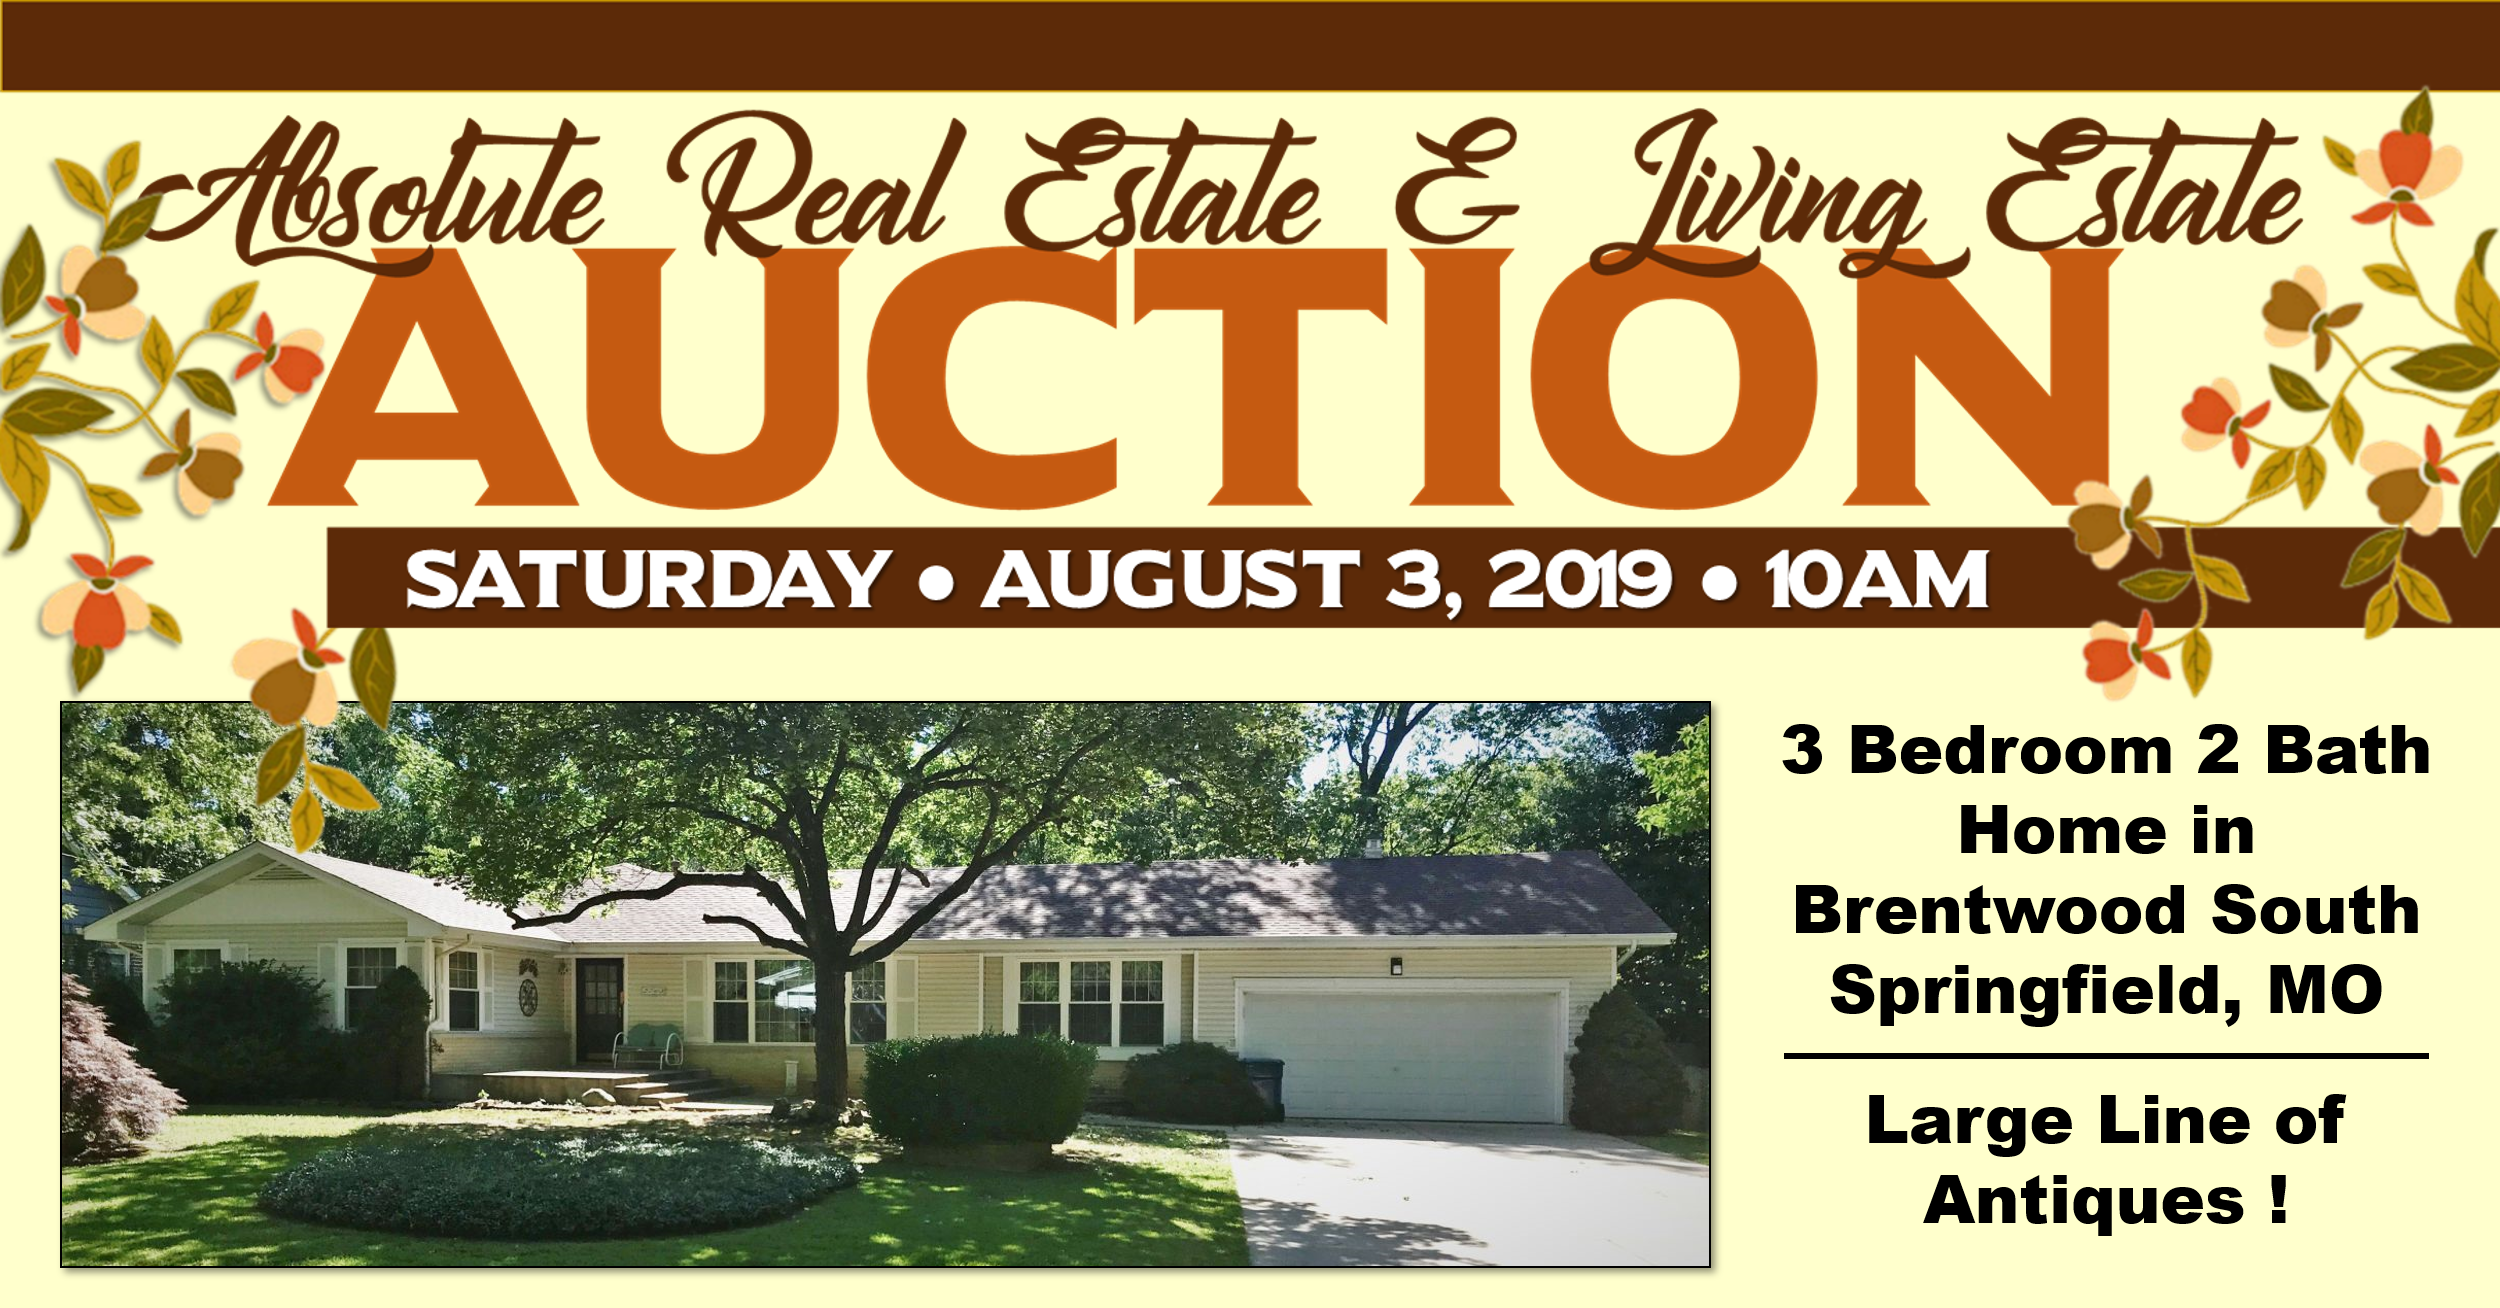 ABSOLUTE REAL ESTATE & LIVING ESTATE AUCTION